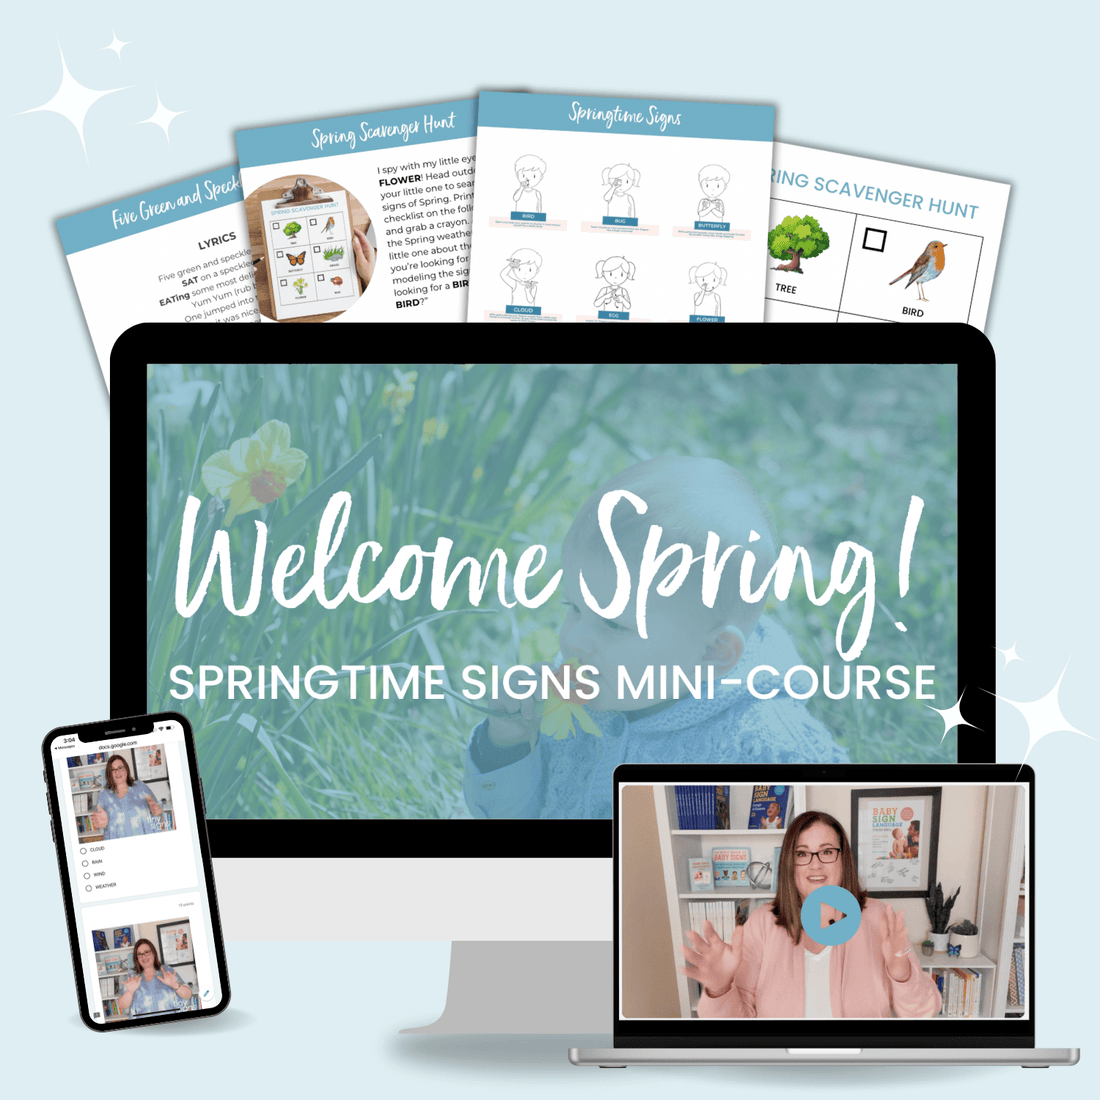 Welcome Spring! Springtime Signs Mini-Course